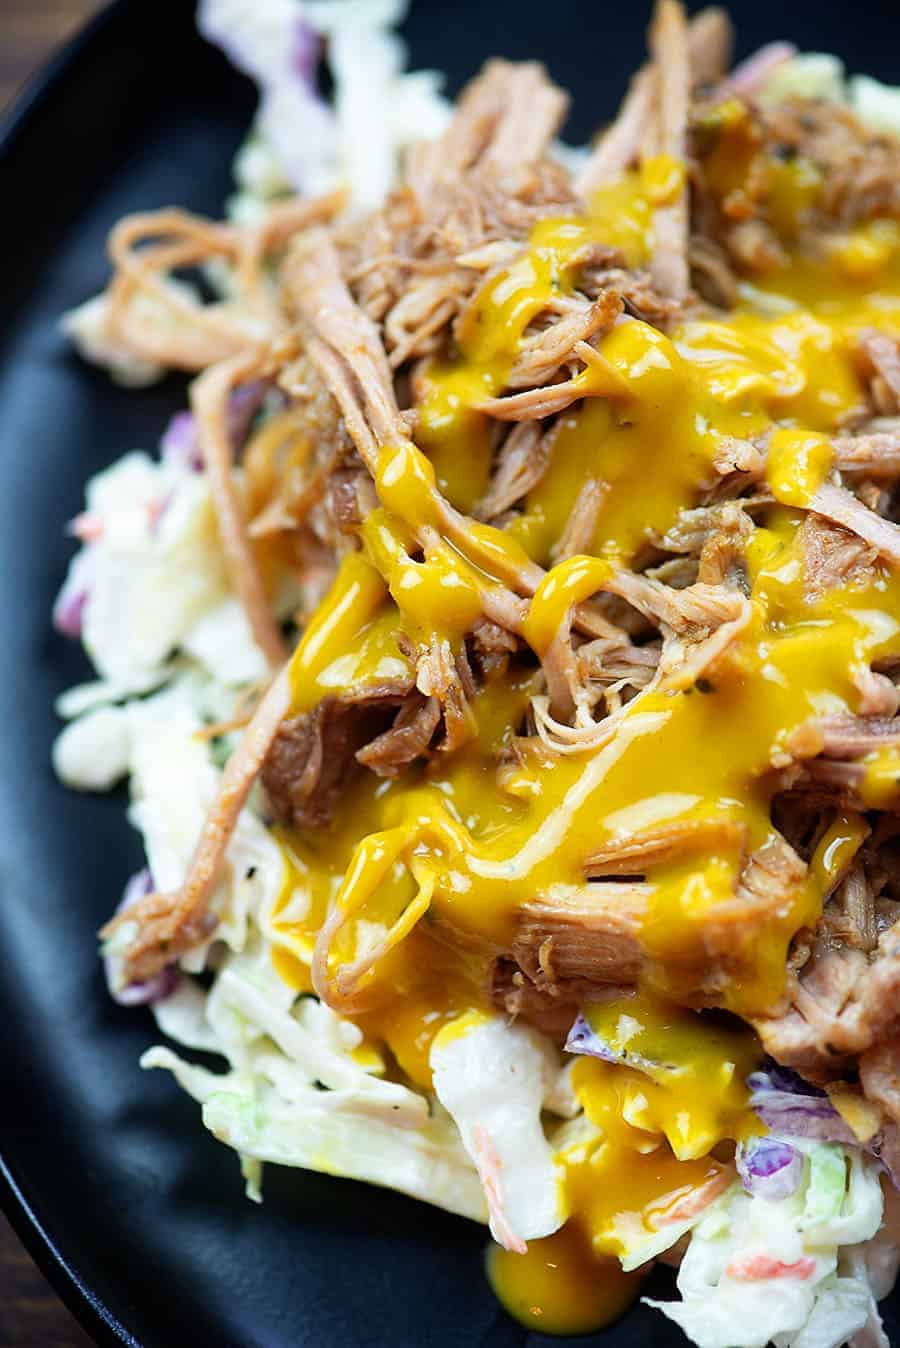 bbq sauce on  pulled pork and coleslaw